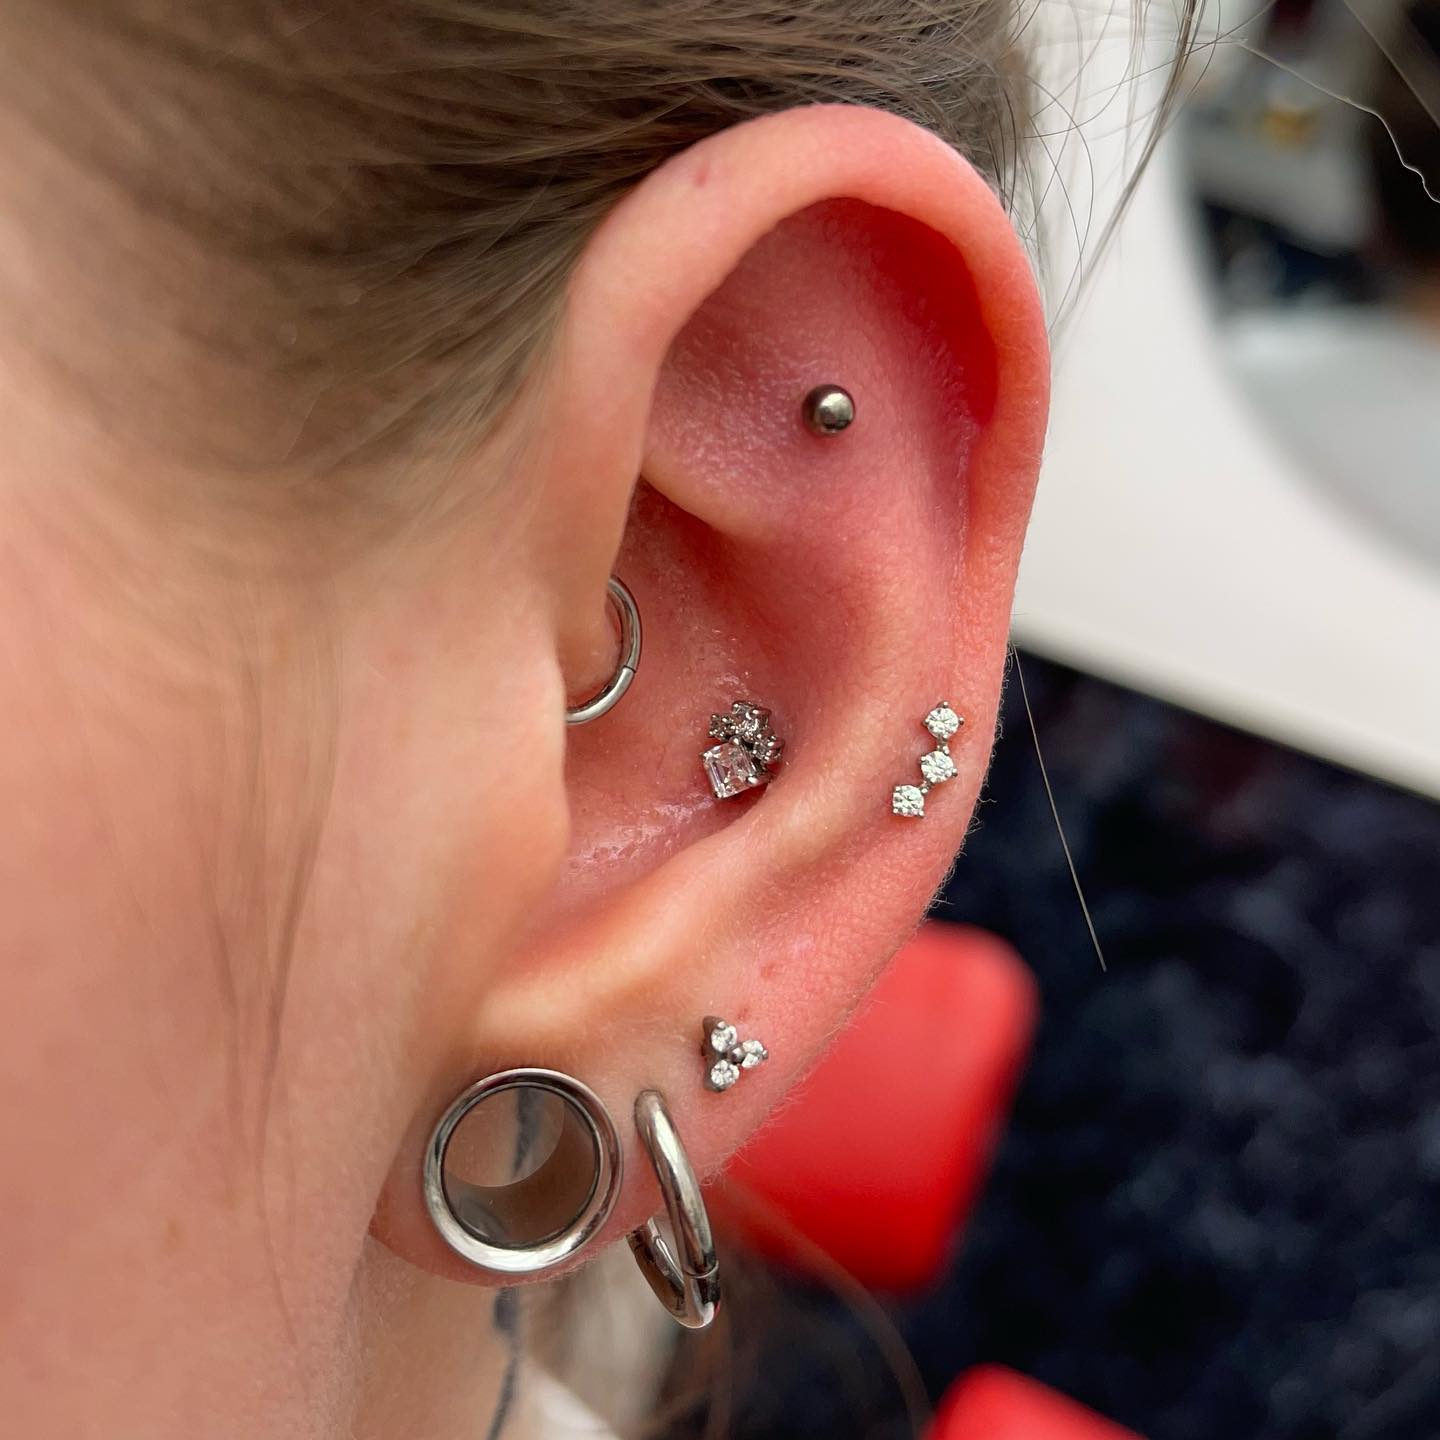 We are obsessed with piercingsbyreese ‘s set up! All piercings done at Studio XIII by all 3 of our resident piercers, and featuring some beautiful pieces by Laura Bond in her healed conch & mid-helix ✨🤍

Use the “book now” button on our page to book yourself in if you fancy something new! & Be sure to check out laura_bond_jewellery if you want to upgrade your ears 💫

                            